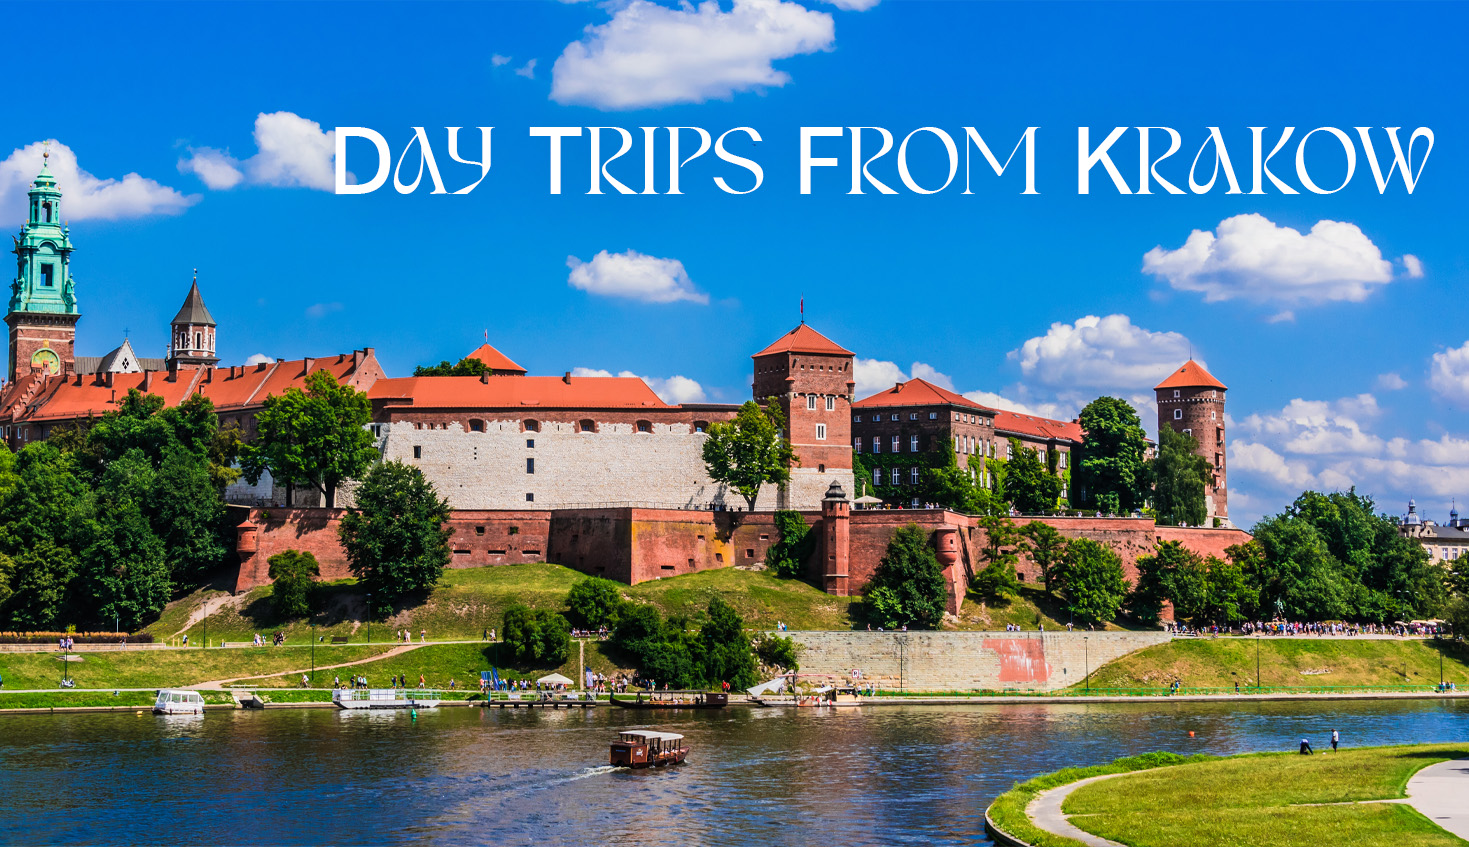 Day Trips From Krakow